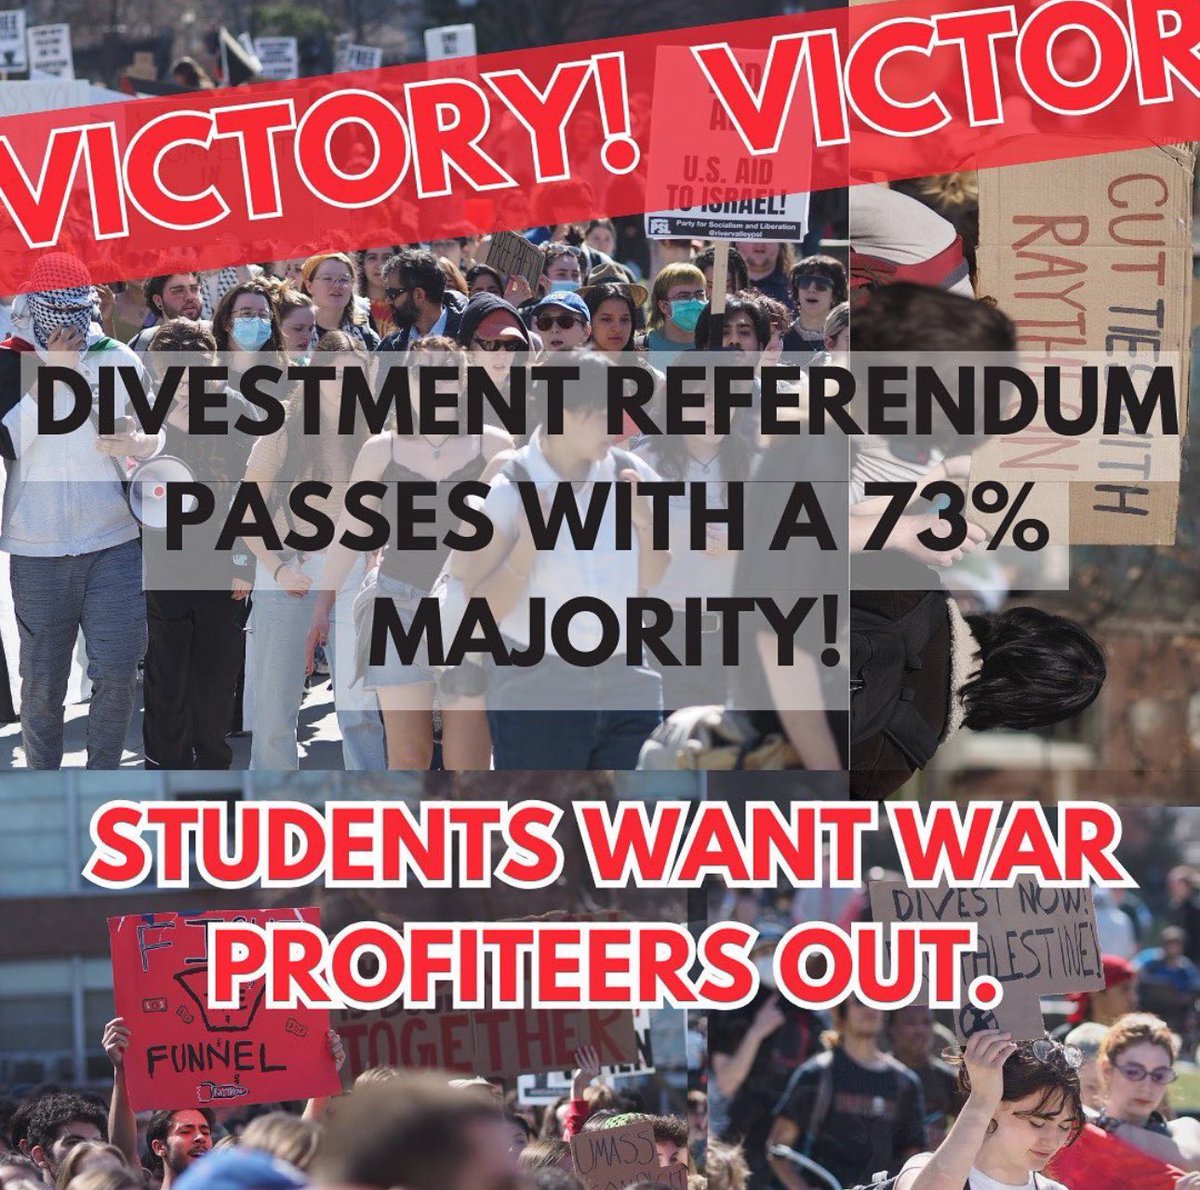 VICTORY: UMass-Amherst students vote to #DivestFromDeath and cut ties with war profiteers‼️